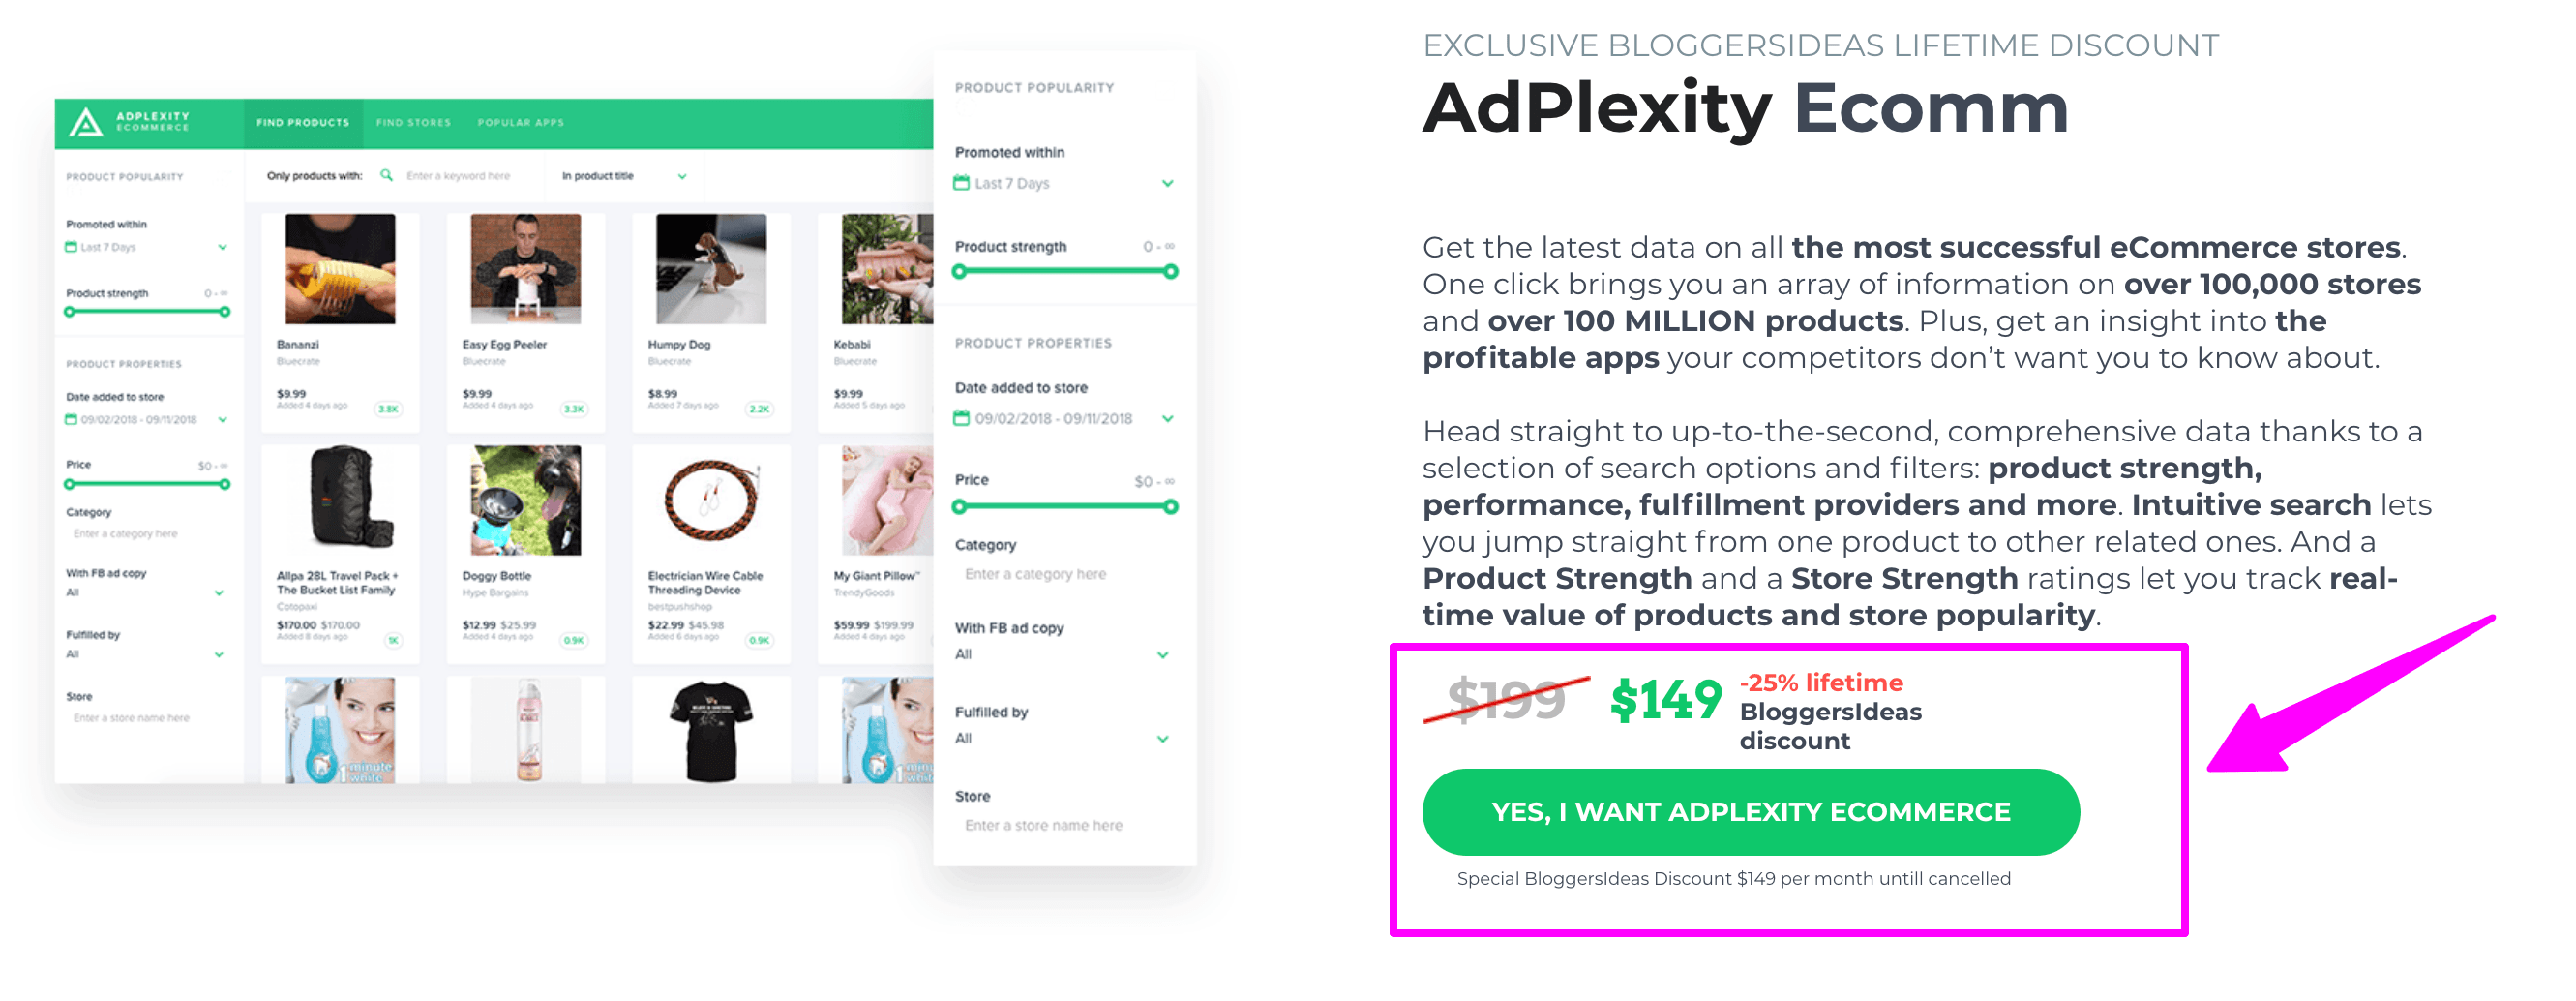 adpelxity-for-ecommerce